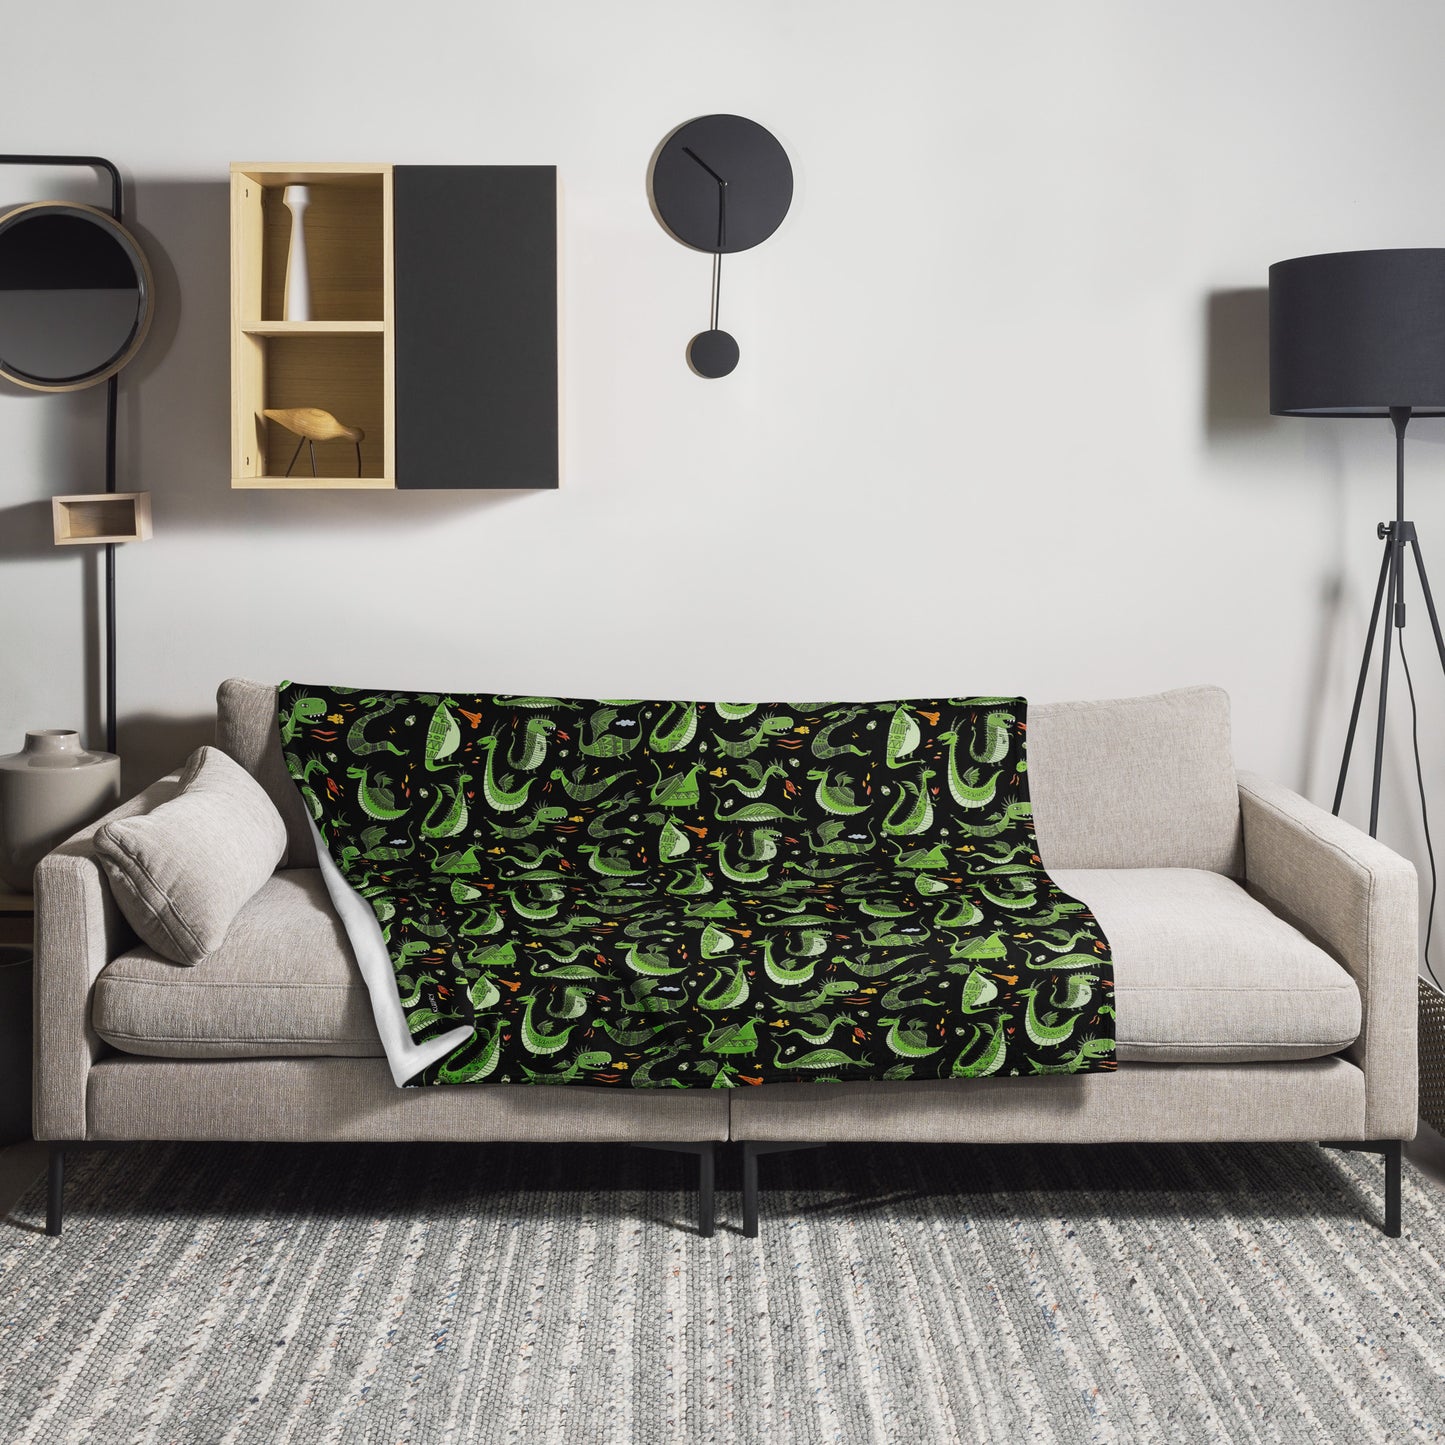 Design Interior with Black blanket 50x60 with funny green dragons on sofa in the room